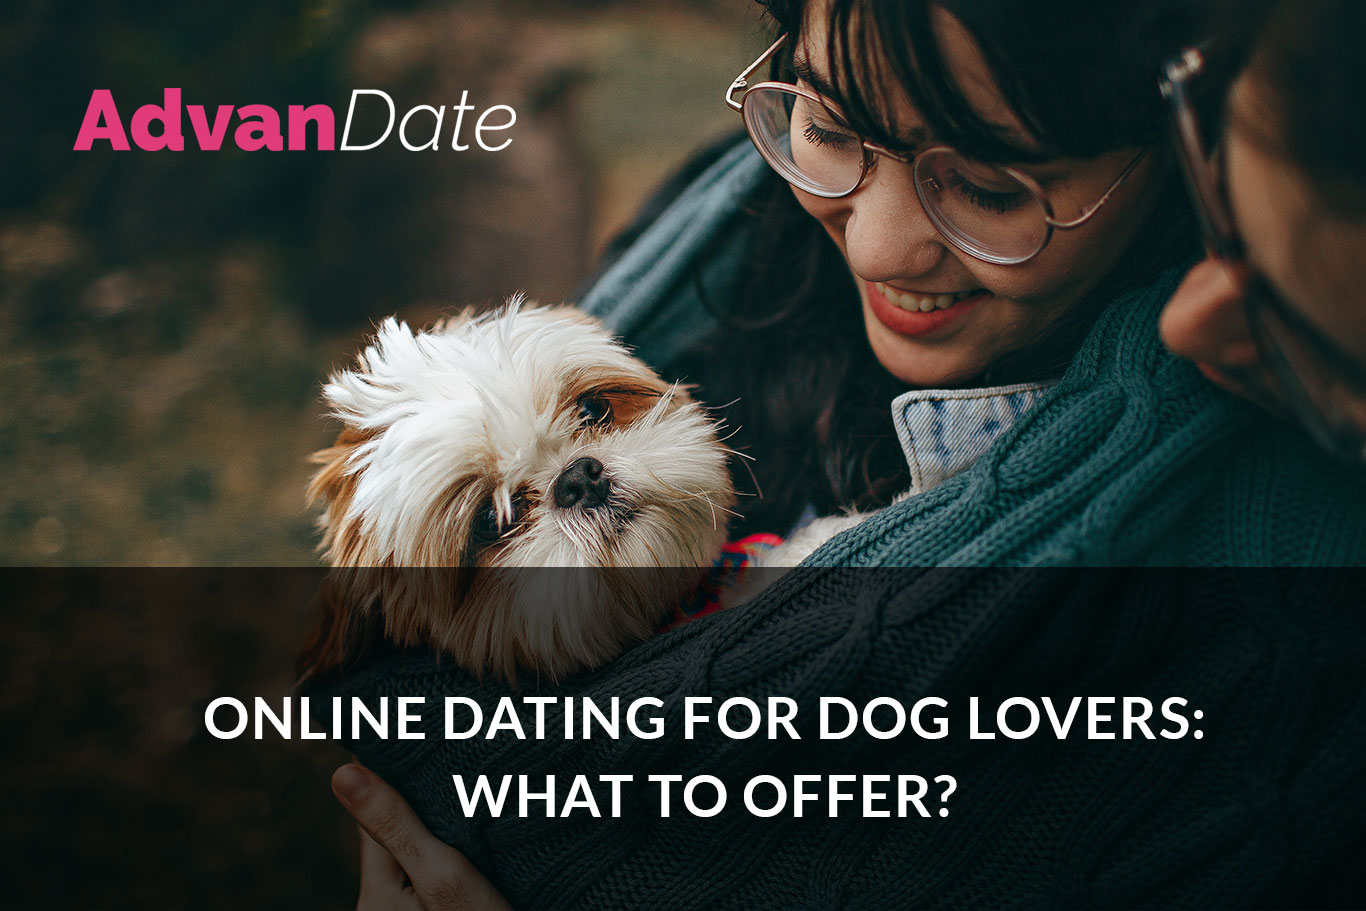 Online dating for dog lovers: what to offer?